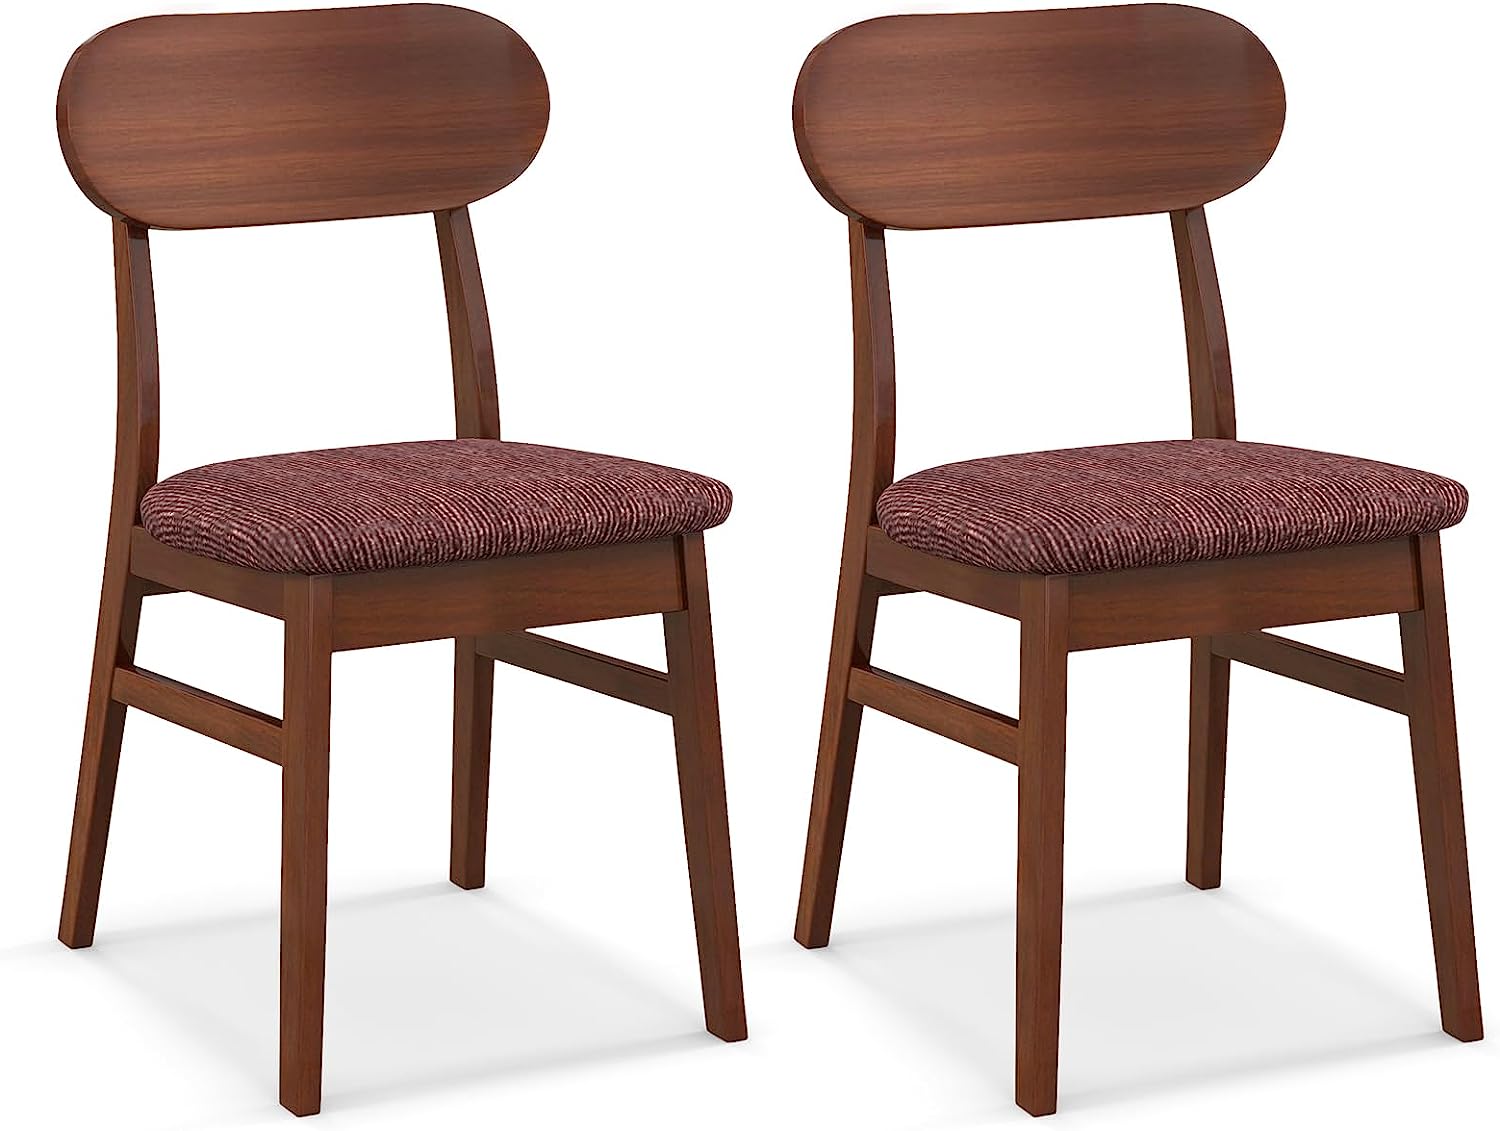 Giantex Wooden Dining Chairs Set of 4 Walnut, Farmhouse Kitchen Chairs with Padded Seat